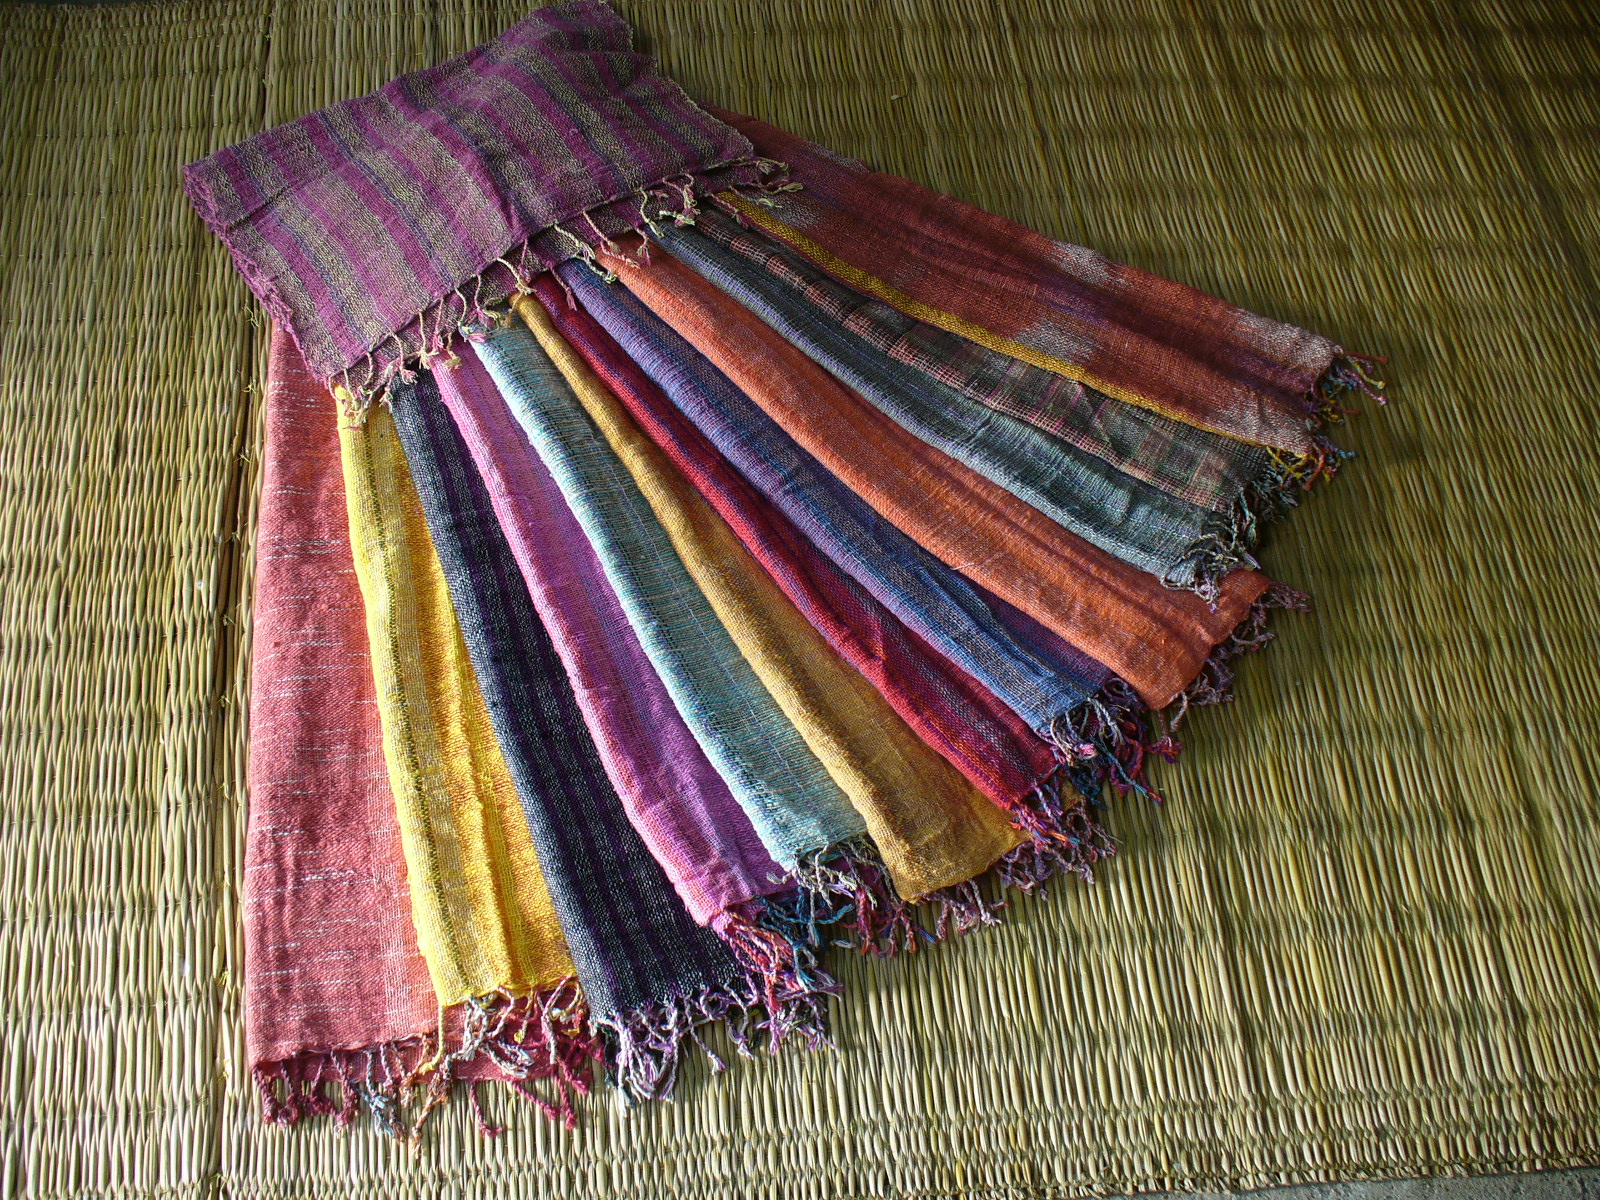 "Chiang Mai" Handwoven Cotton Scarves